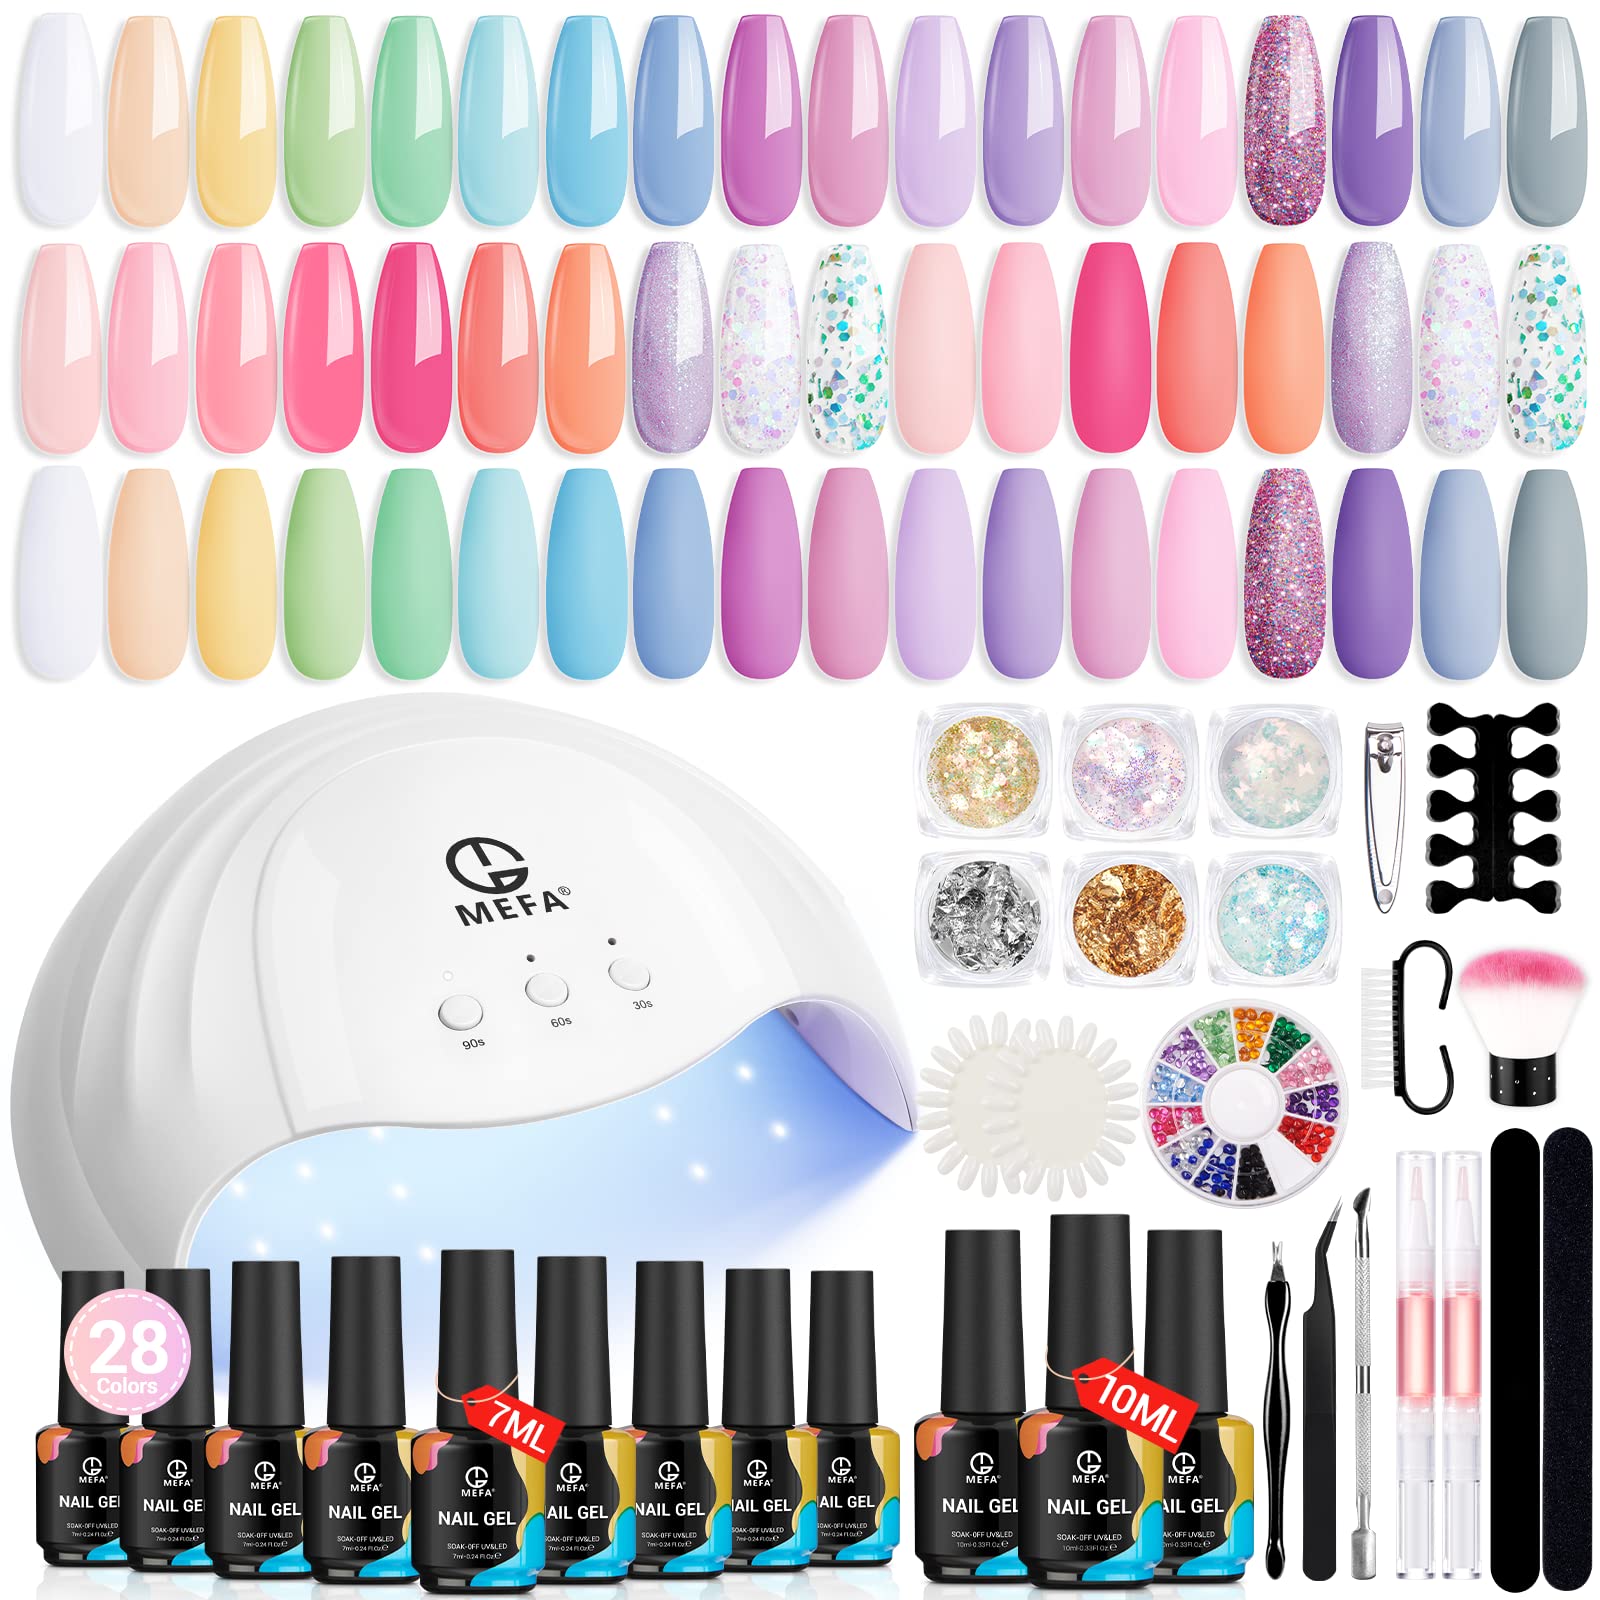 Drizzle Beauty Gel Nail Polish Kit with 24/48W UV LED Light Lamp Dryer, 6  Colors Gel Polish Starter Set with 3 Pcs Top Coat Base Gel 50 Pack Remover  Pad Manicure Tools… 6+3 Starter Kit